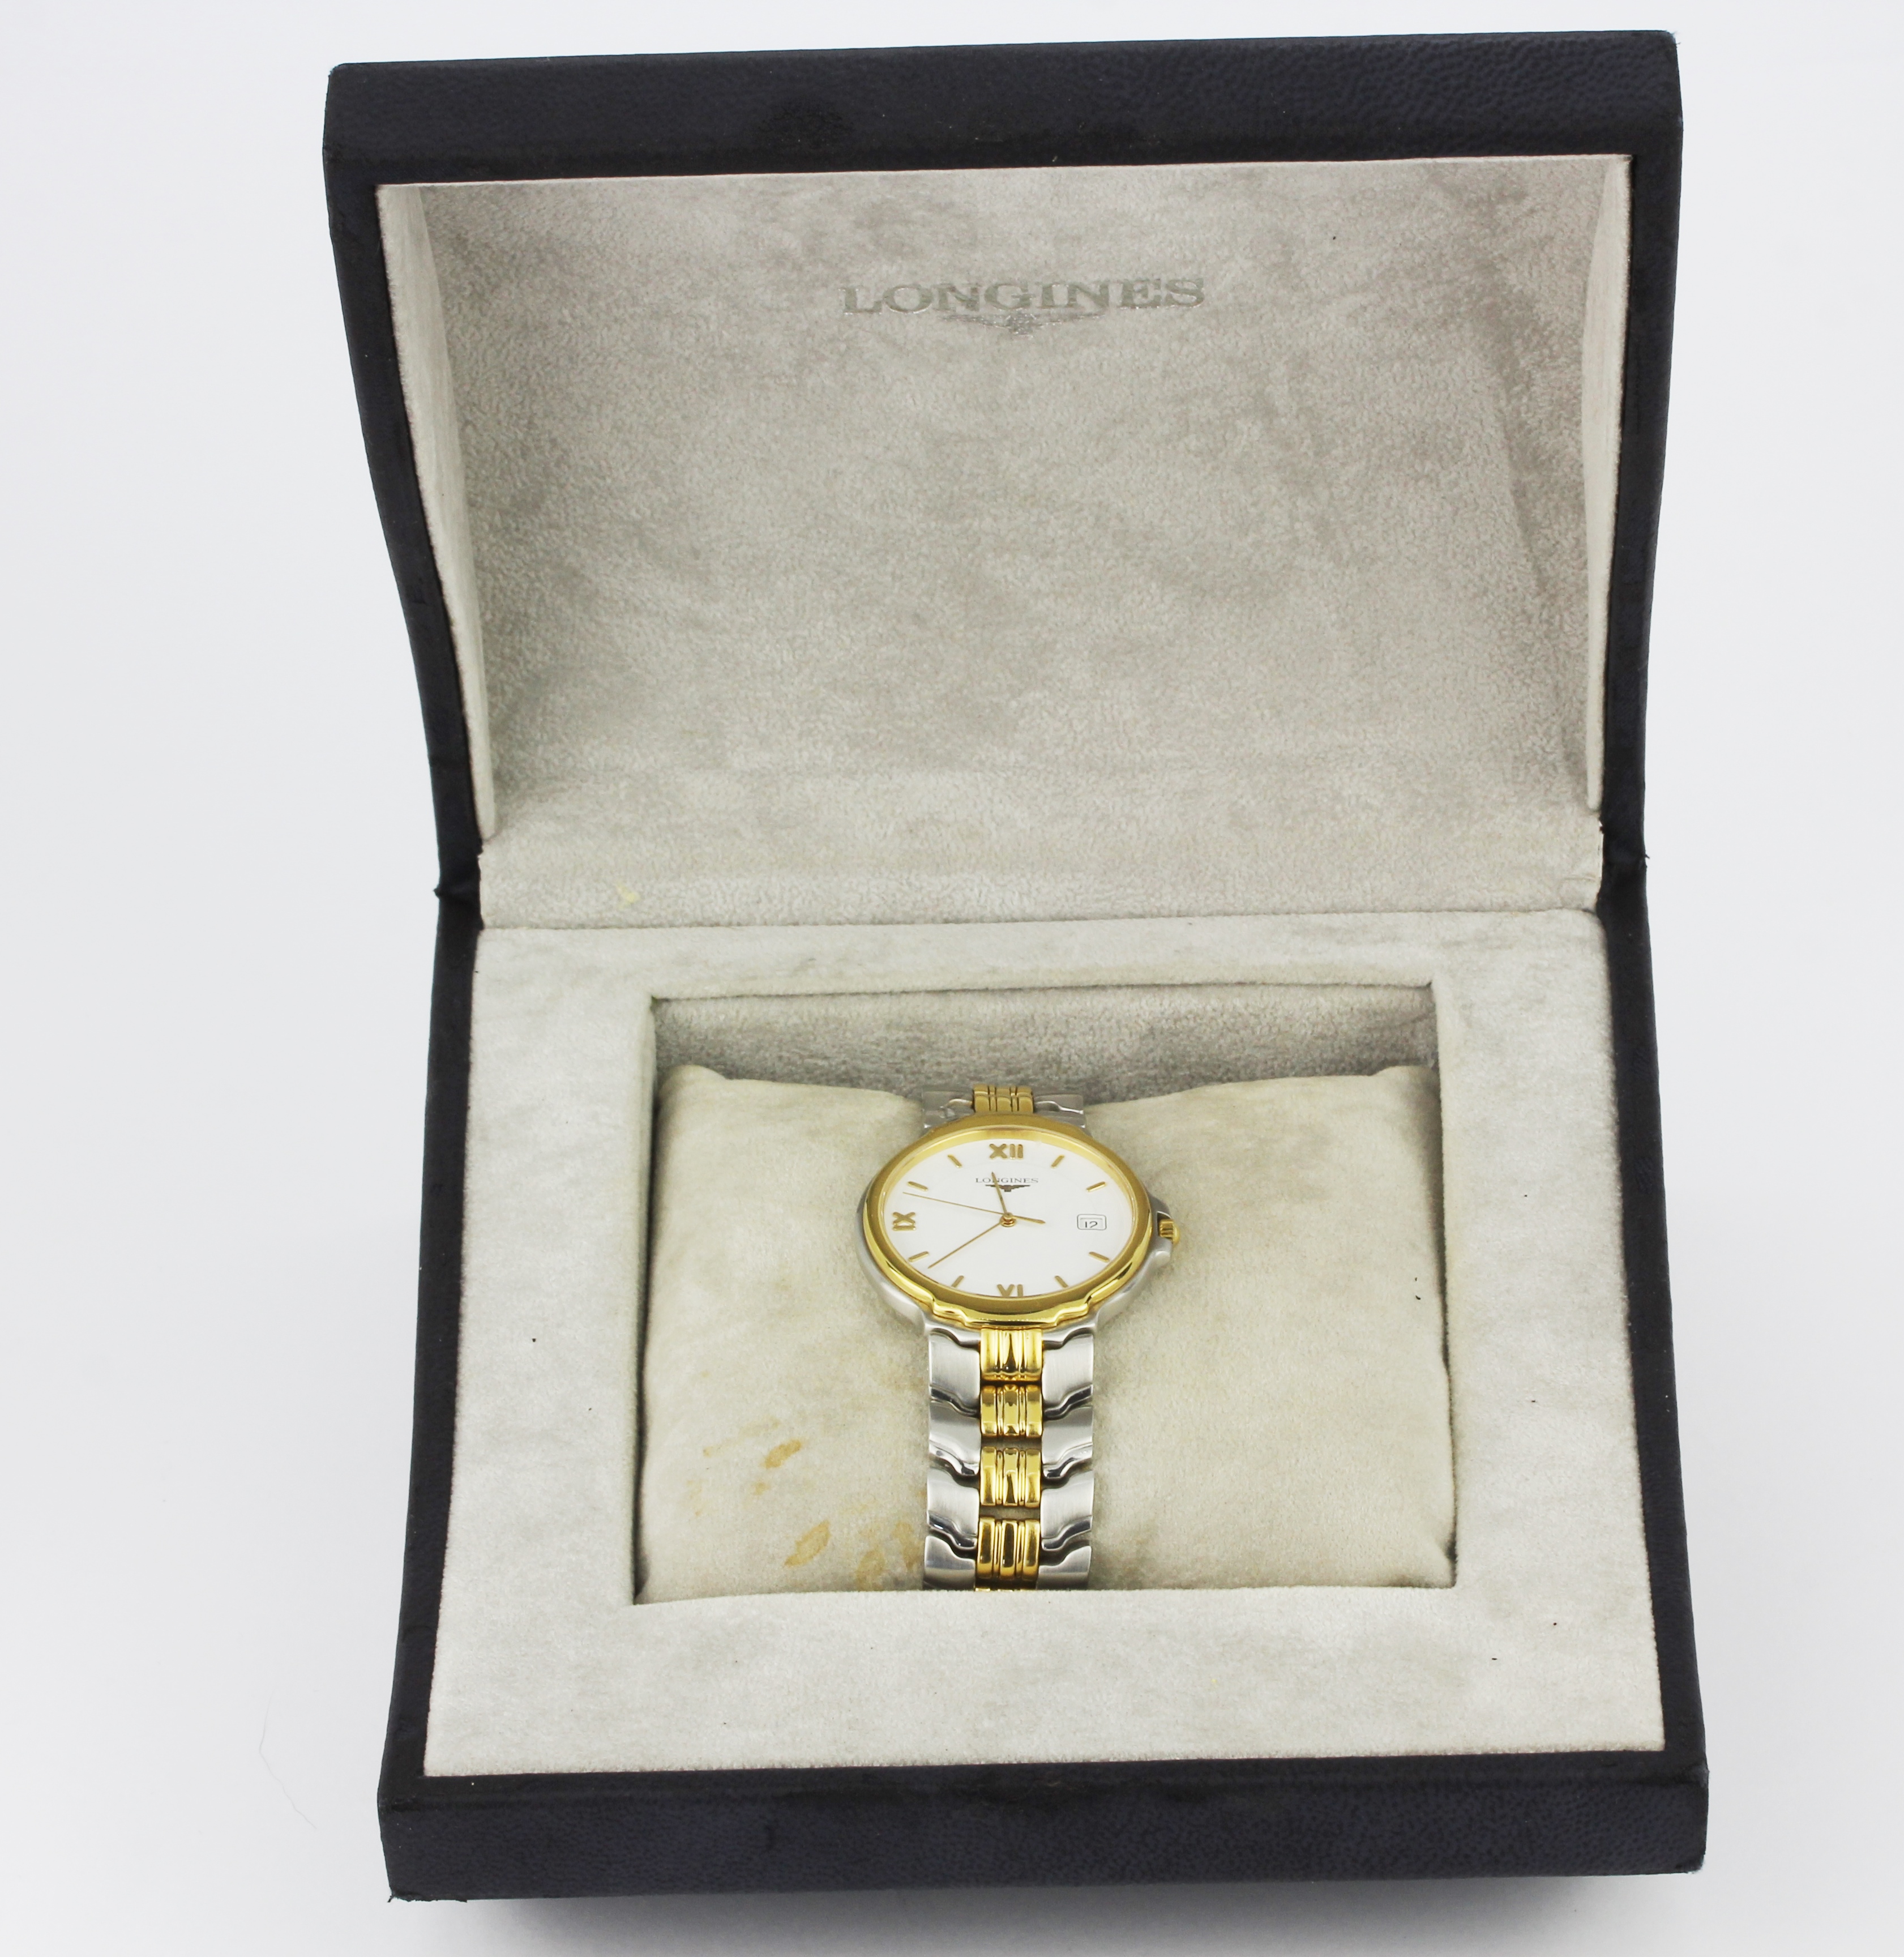 A boxed gentleman's Longines stainless steel wrist watch with extra links and paperwork.